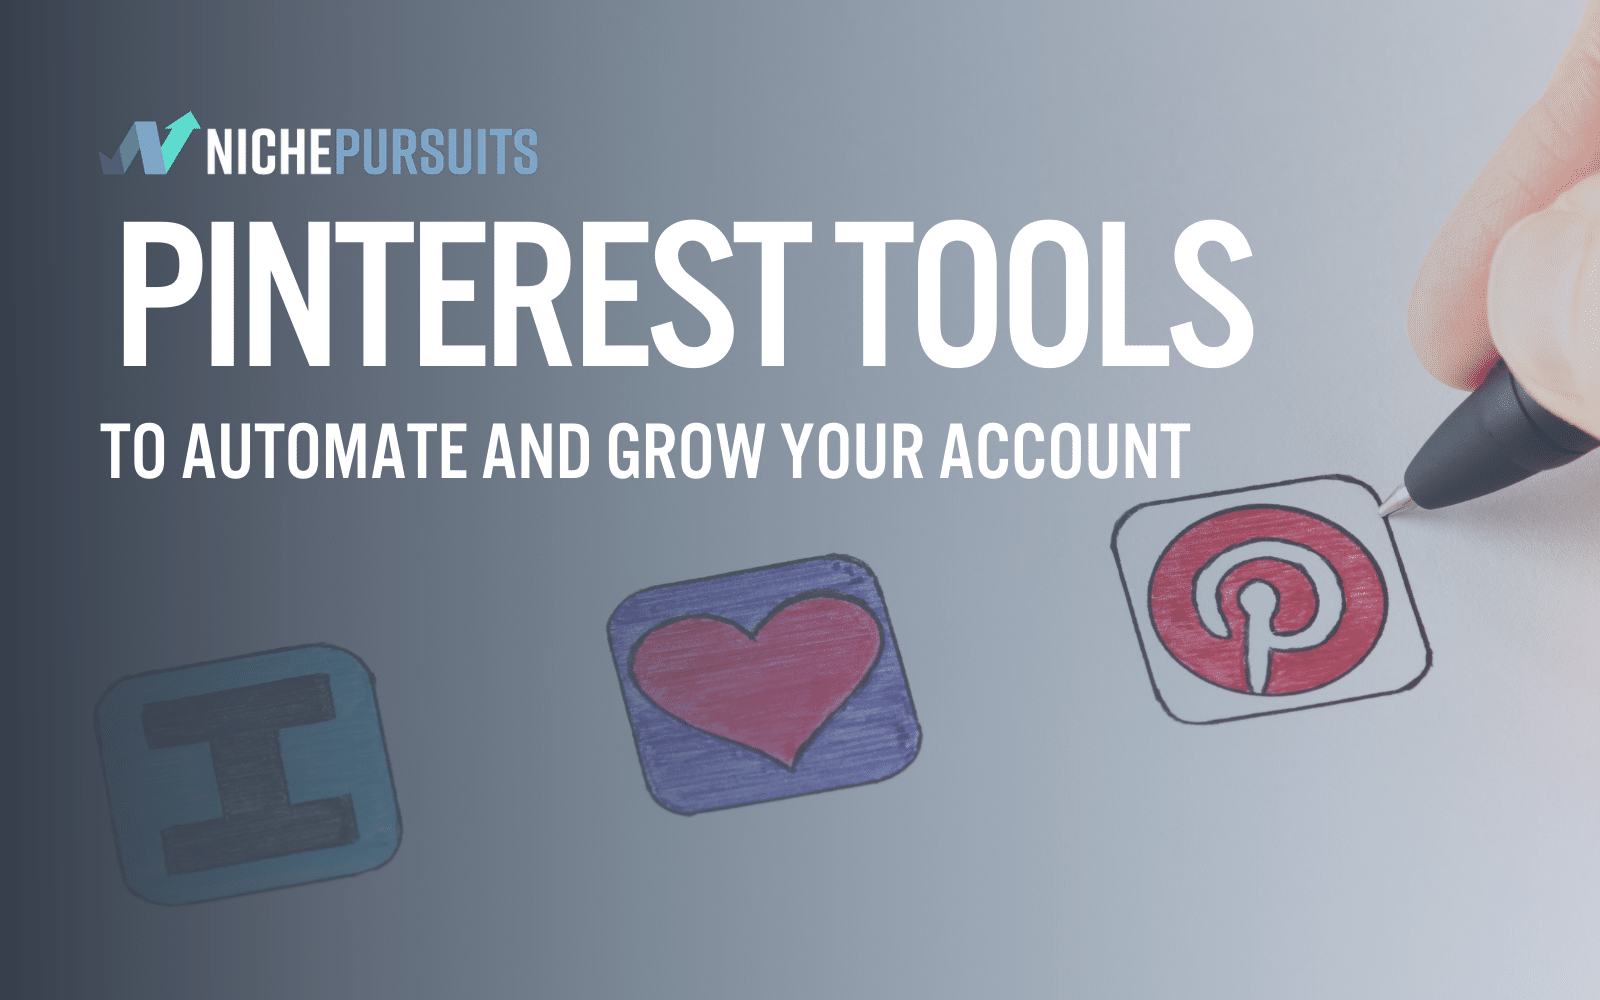 7 BEST Pinterest Tools In 2023 To Automate And Grow Your Account!